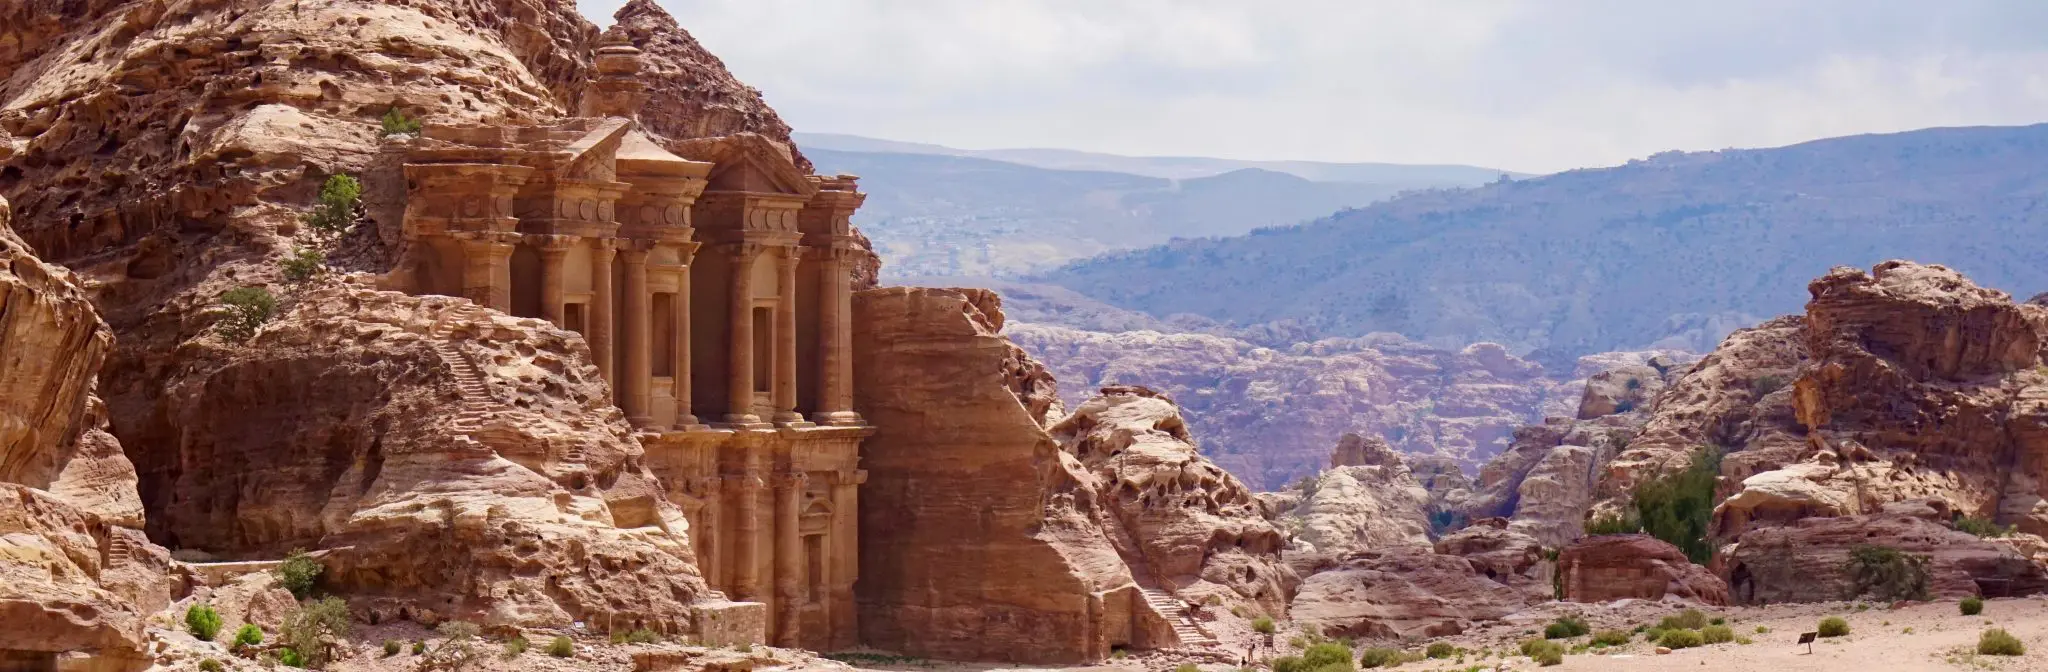 Exciting Facts About Petra, Jordan